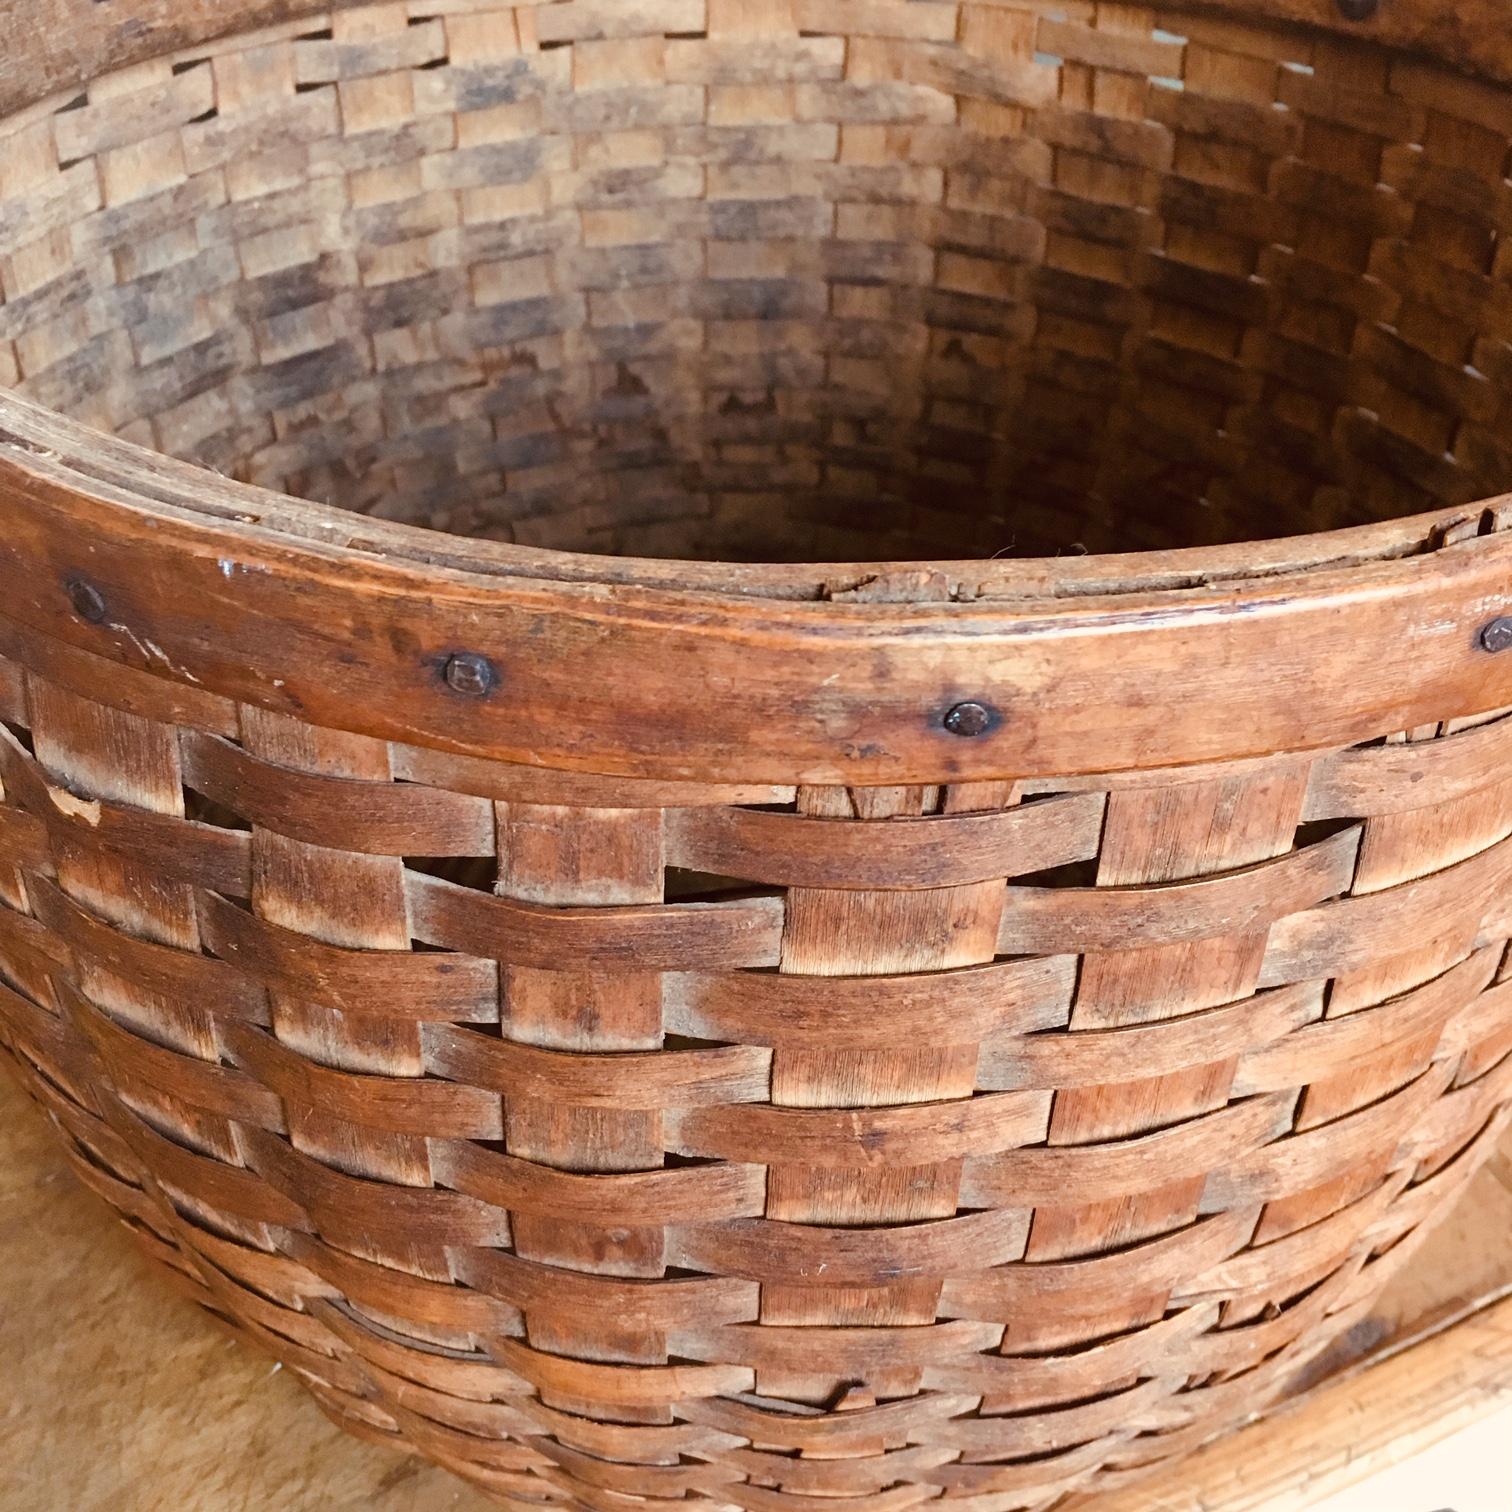 19th century New England woven splint bushel basket, circa 1880, having wide splint staves held between the split oak rim by square cut nails, and carved into a double arrow shape to cross each other on the bottom; the splint weave ends with an